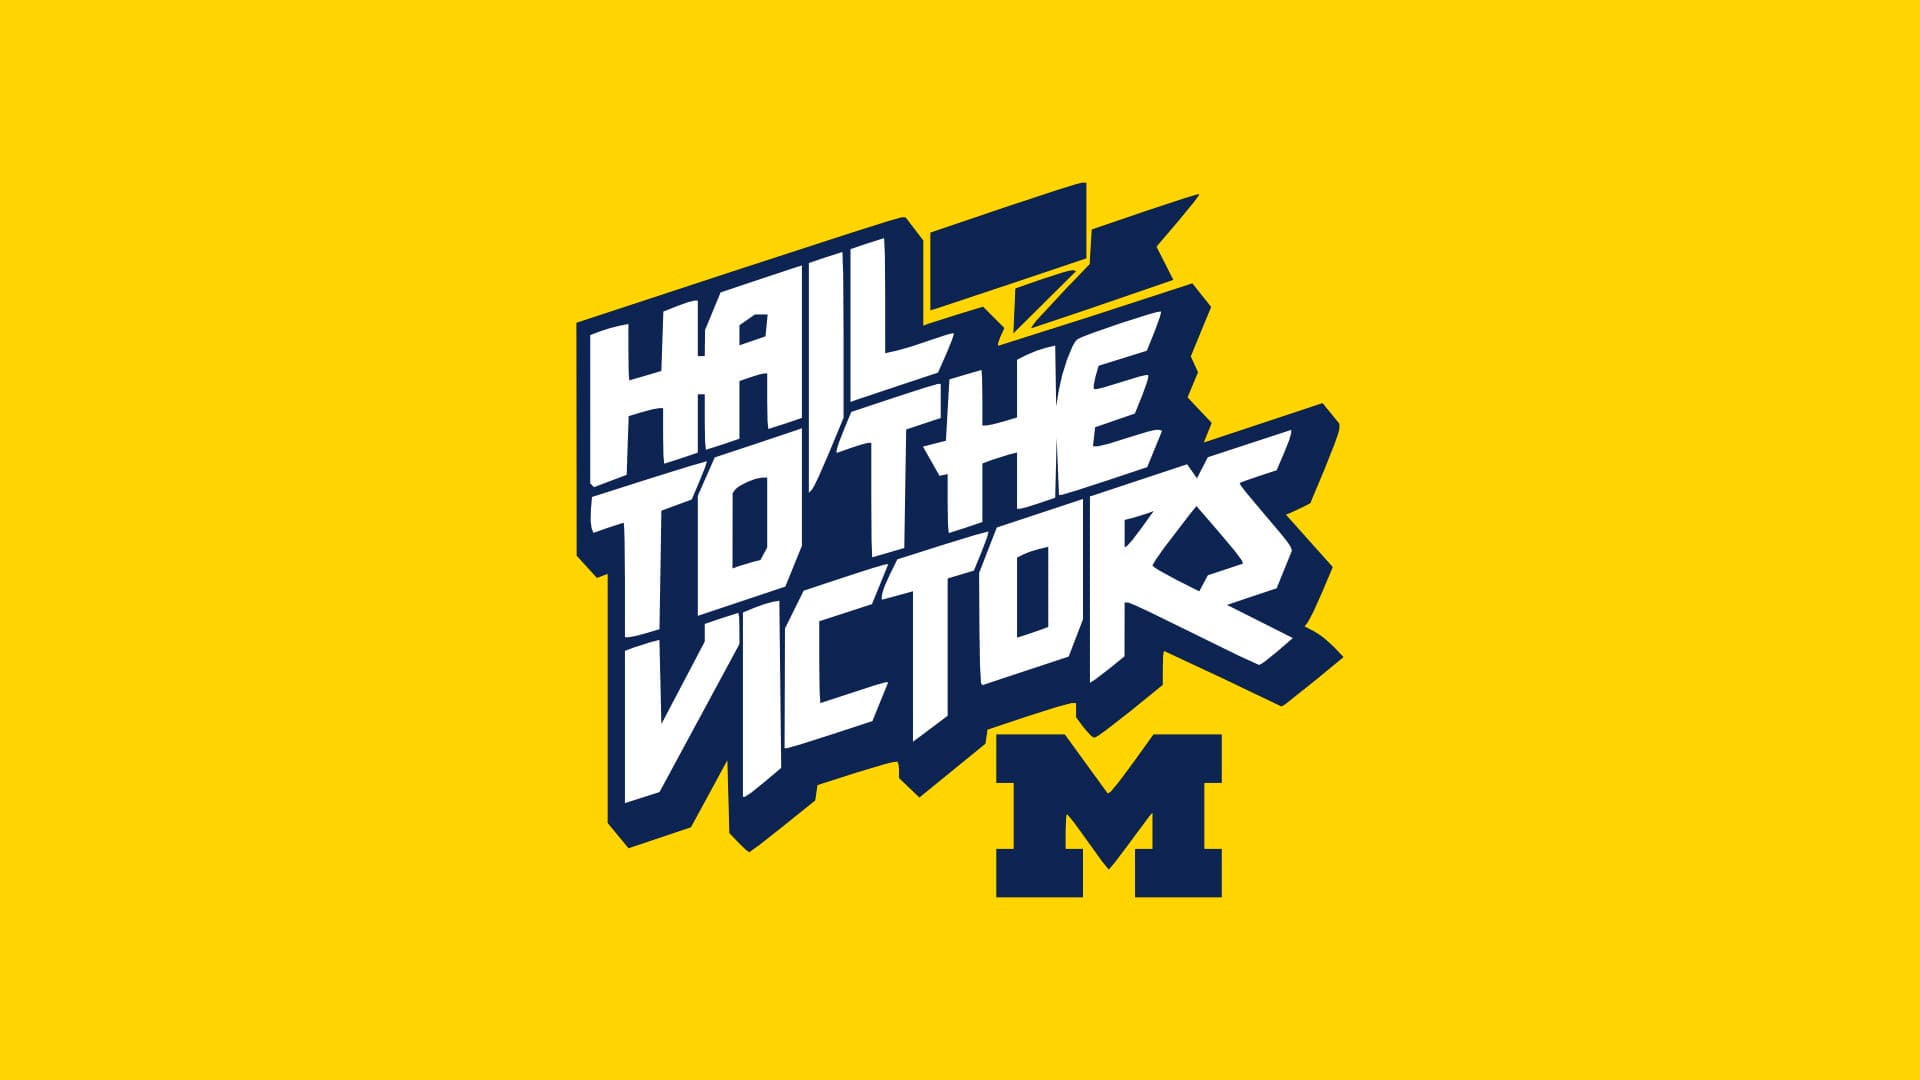 Michigan Wolverines Wallpapers